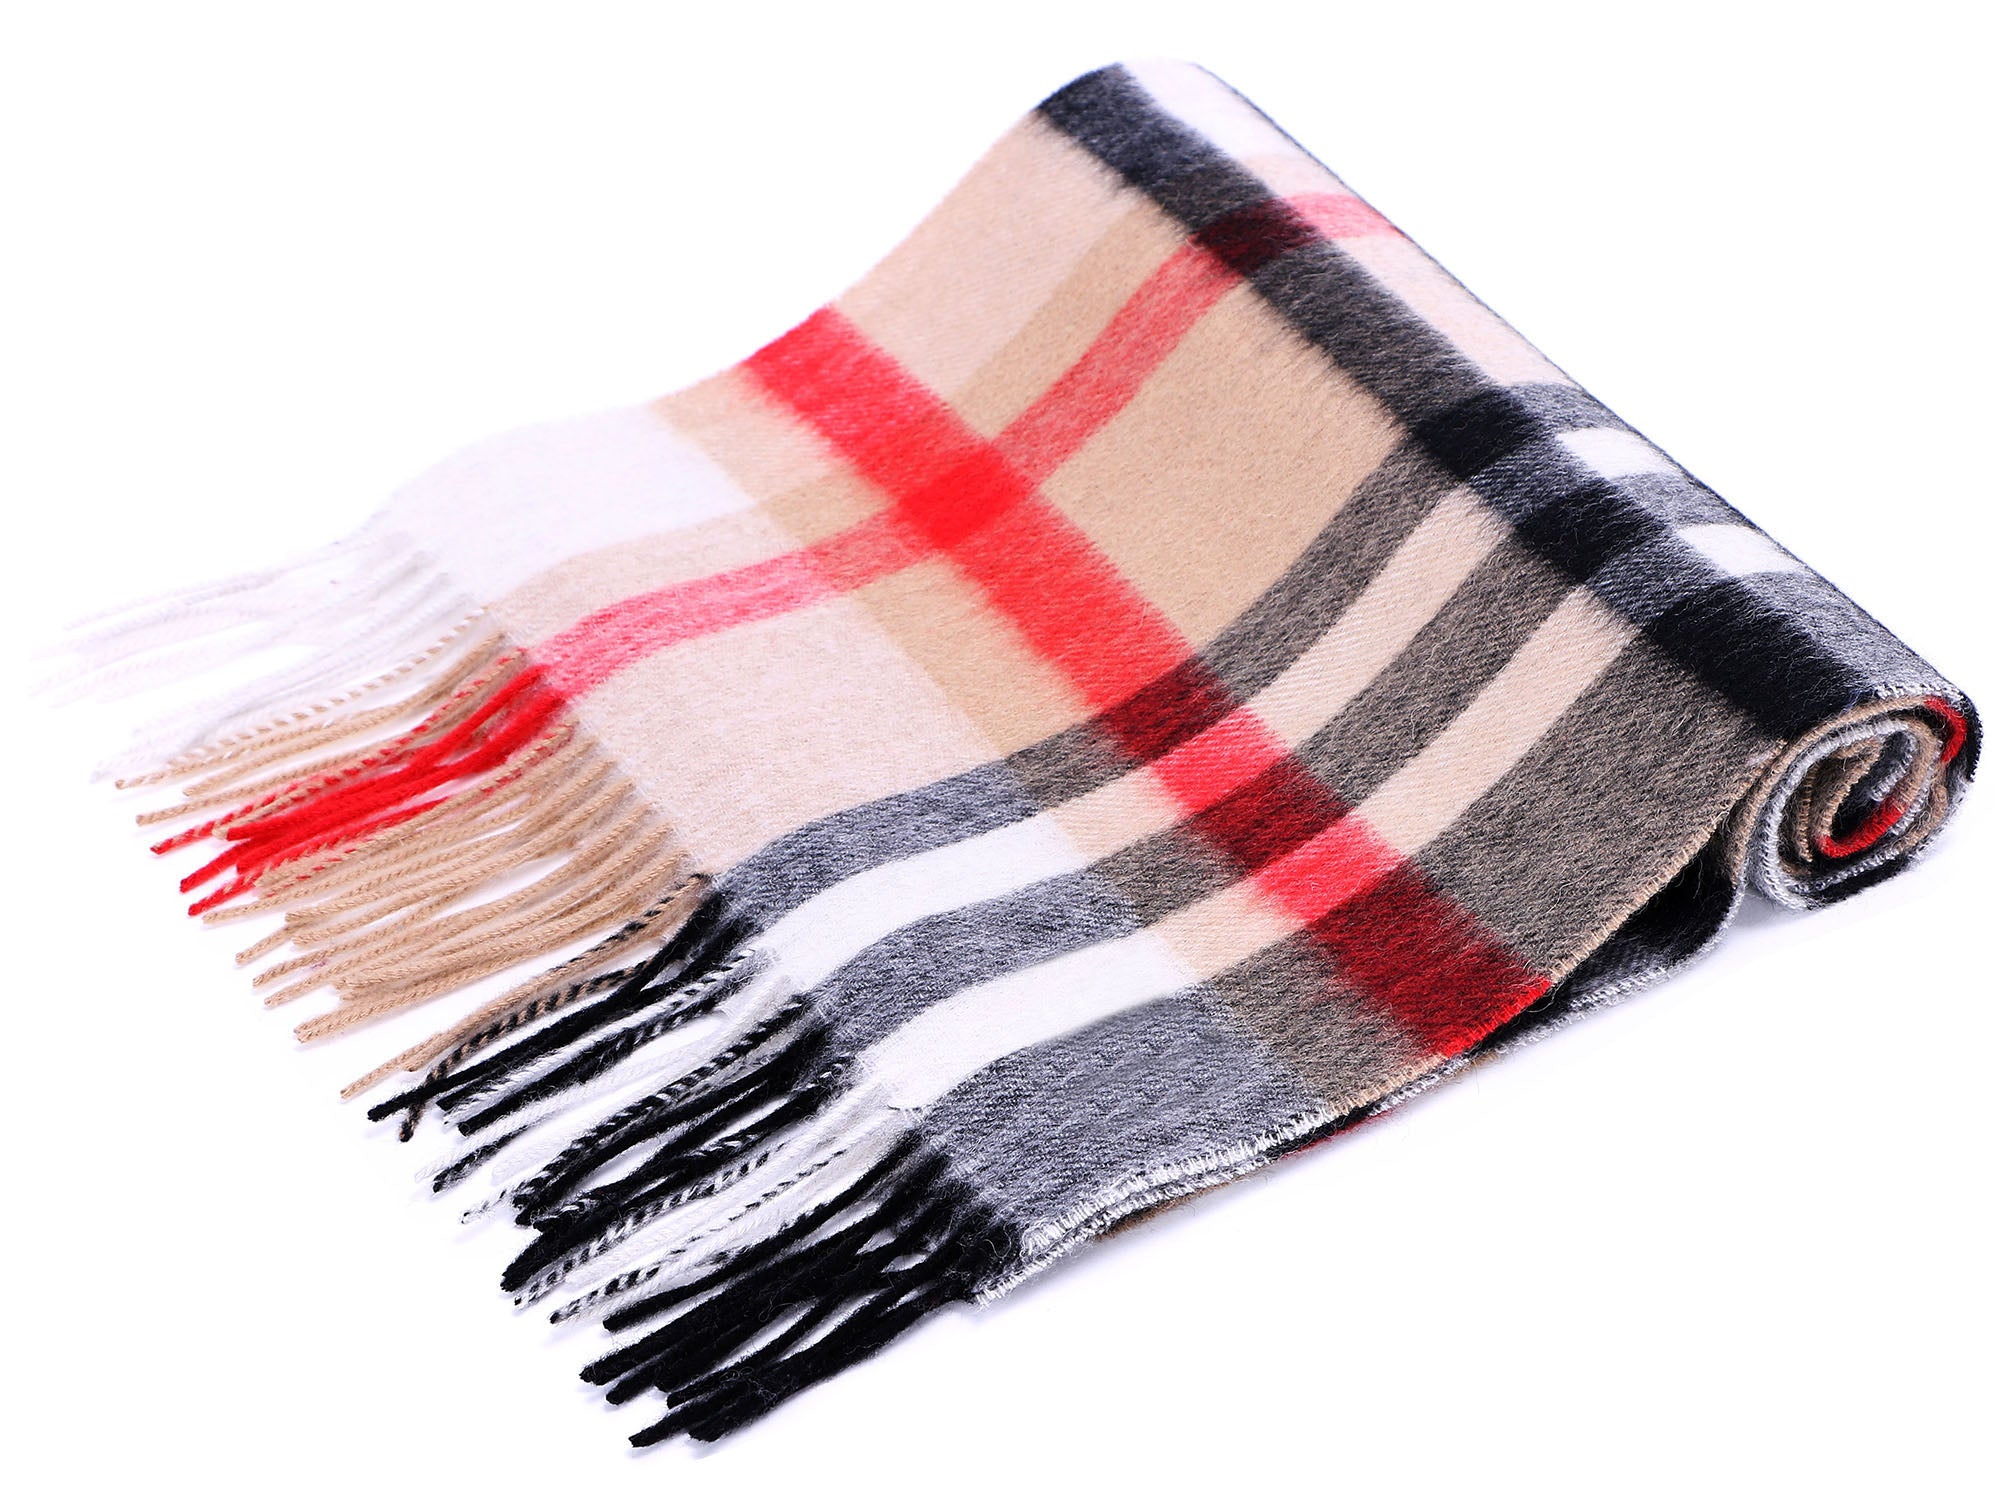 Red Scarf Luxury Replicas High Quality Woman Warm Scarf for New